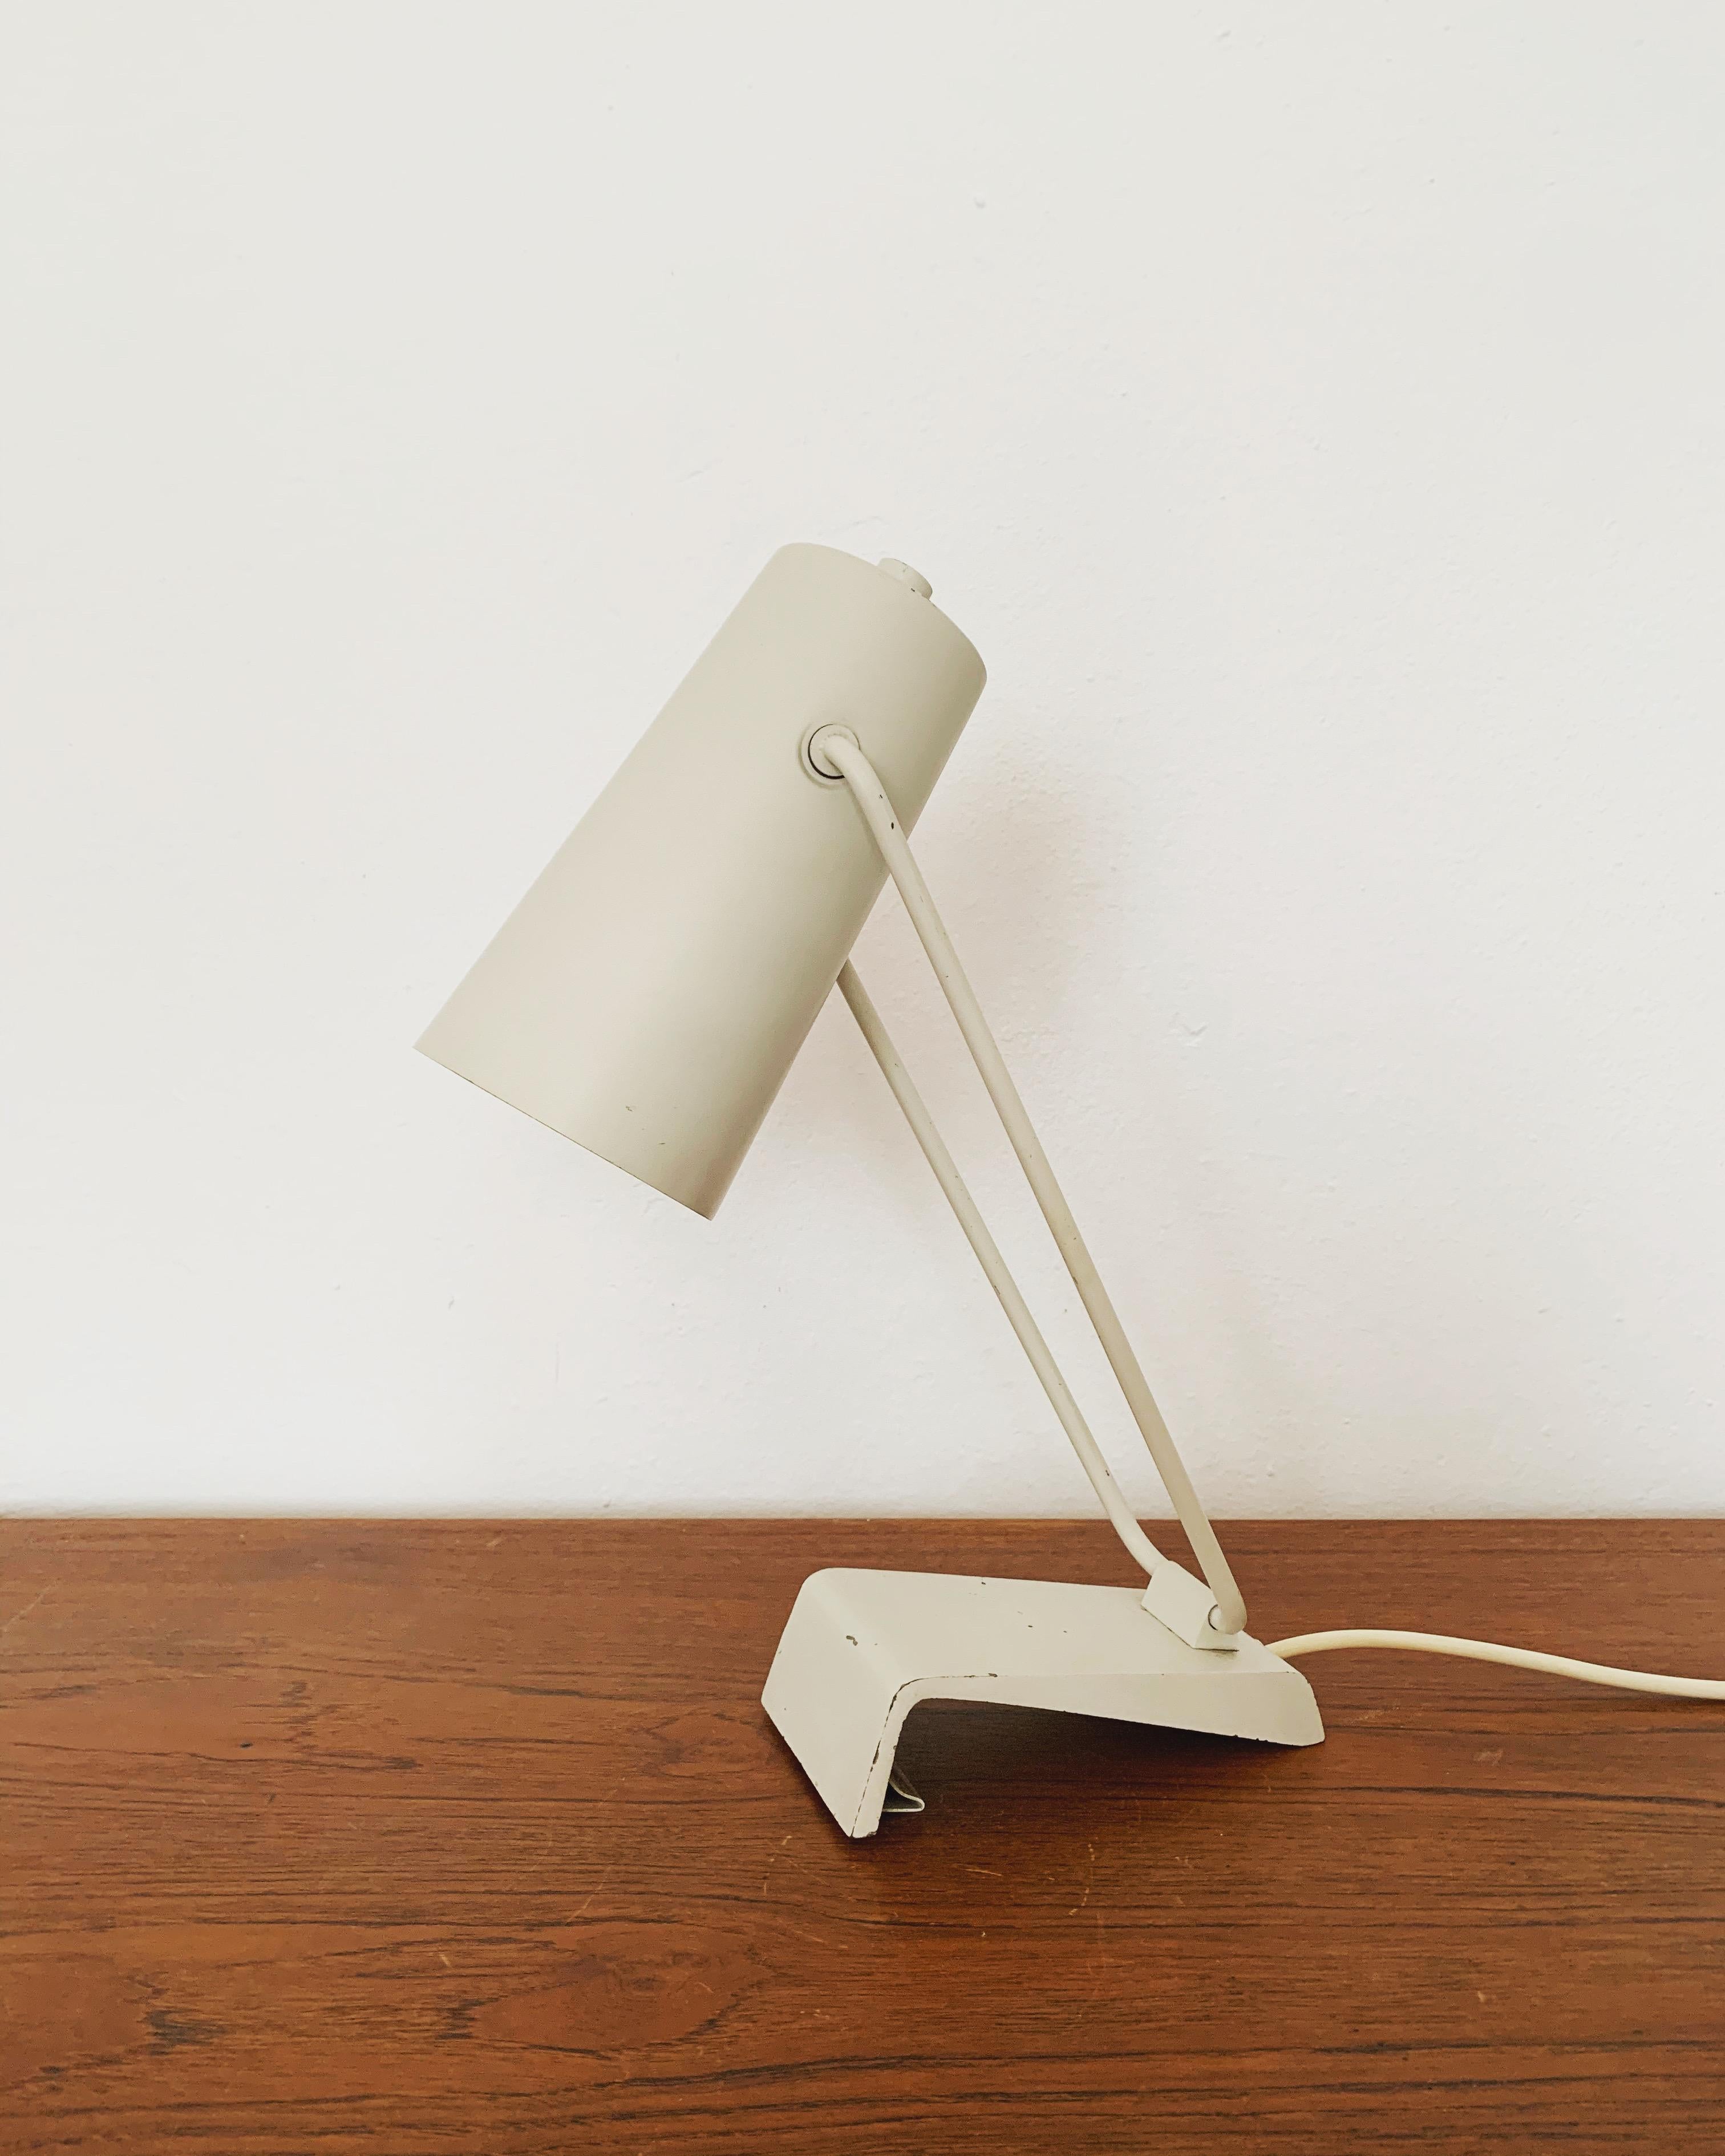 Wonderful industrial Bauhaus lamp from the 1950s by Kaiser Leuchten.
Fantastic mid-century design.
High quality.
The lamp can be used flexibly as a table lamp or as a wall lamp.
The lampshade is flexibly adjustable.

Manufacturer: Kaiser Idell